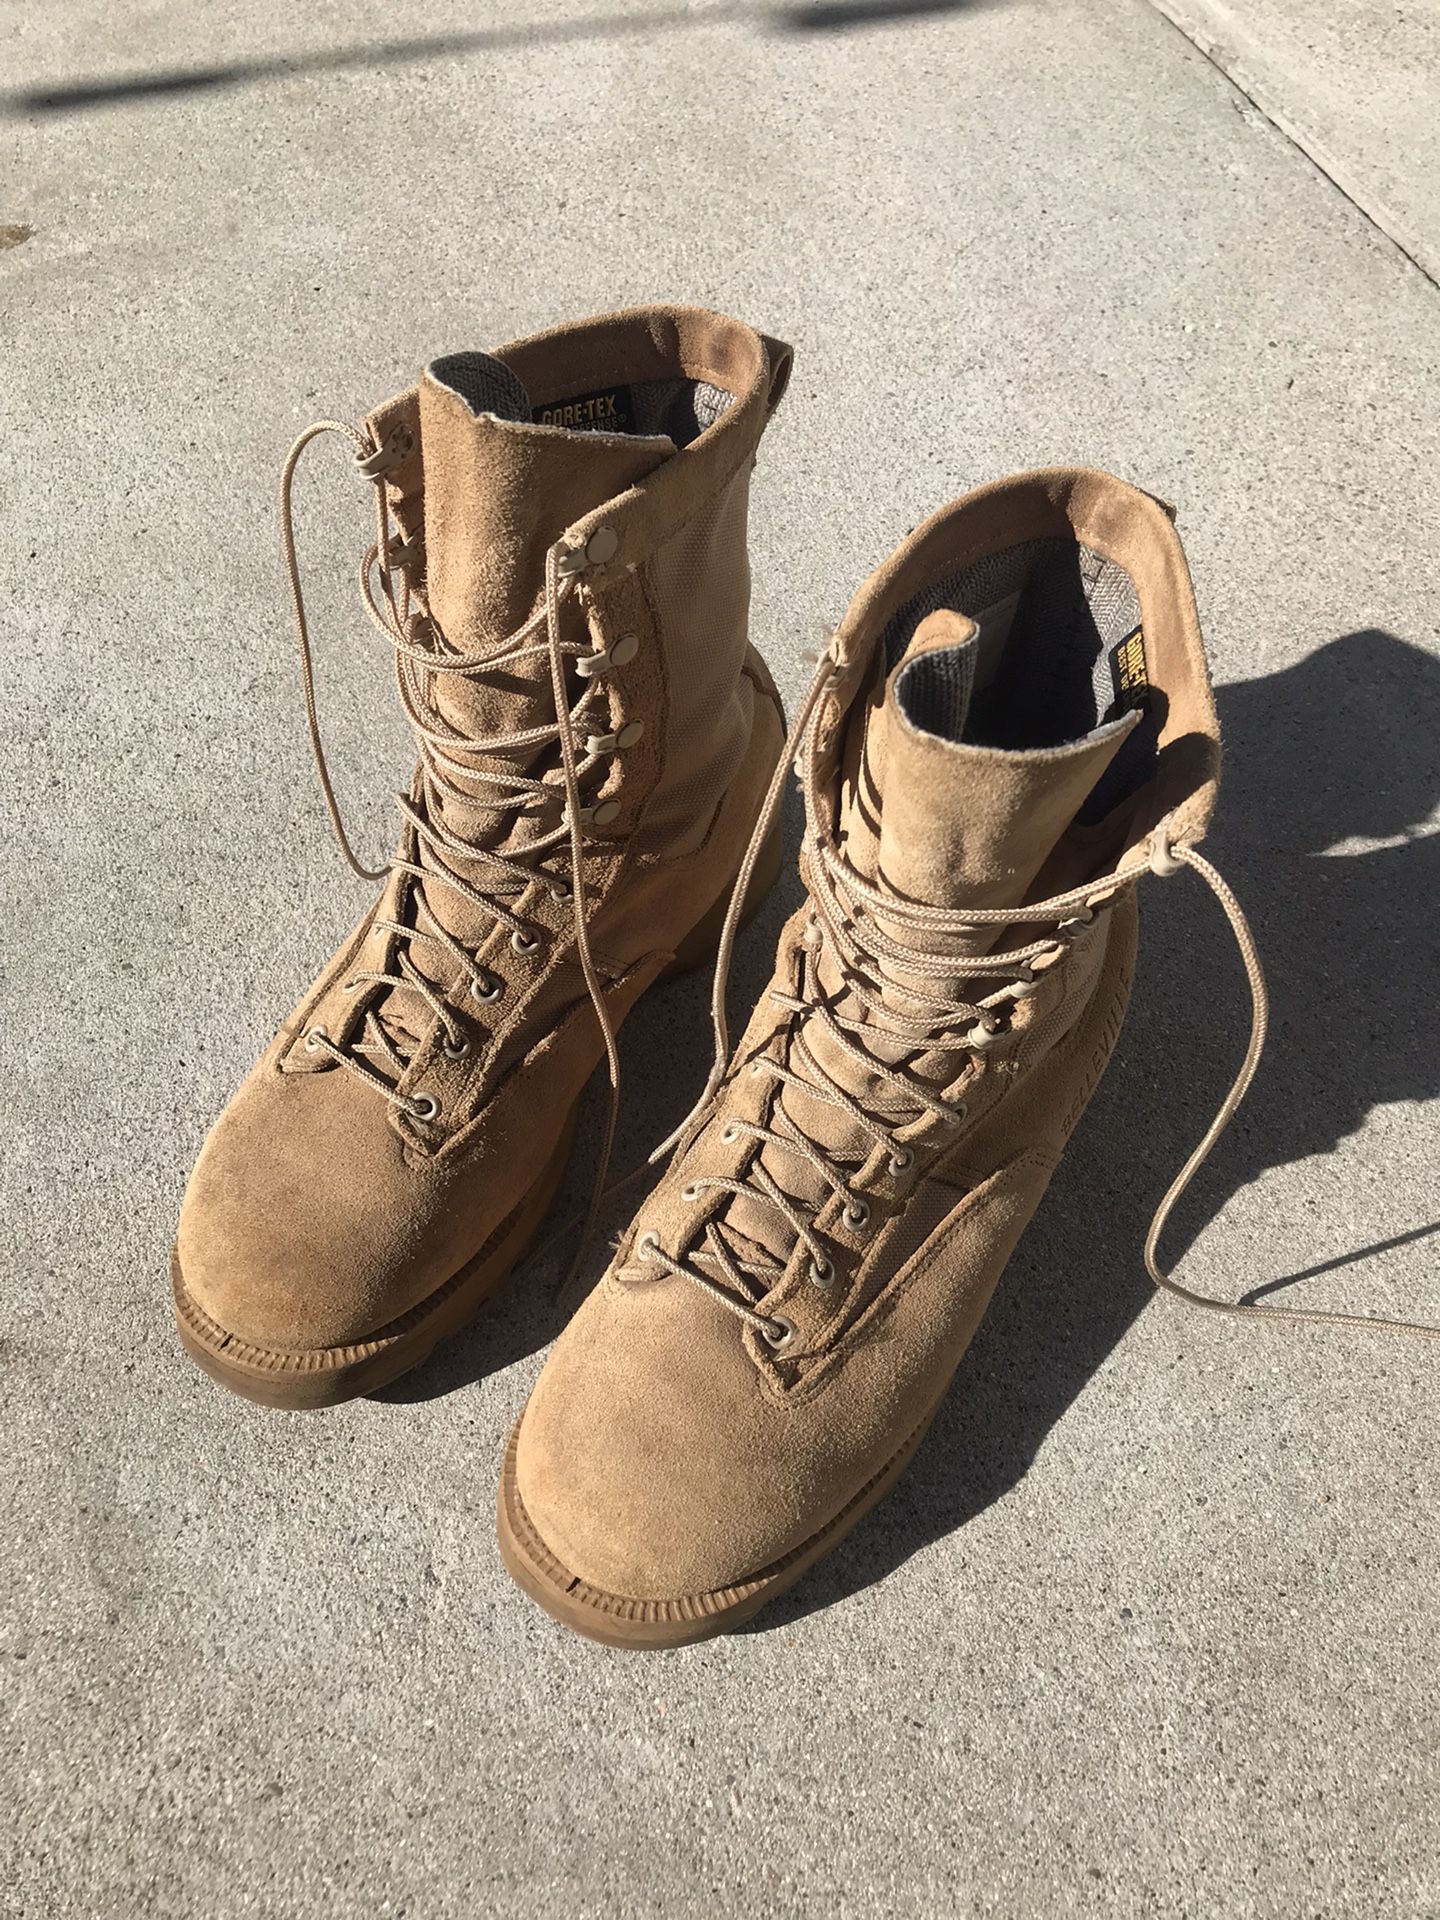 Military Boots Size 10 $75 OBO